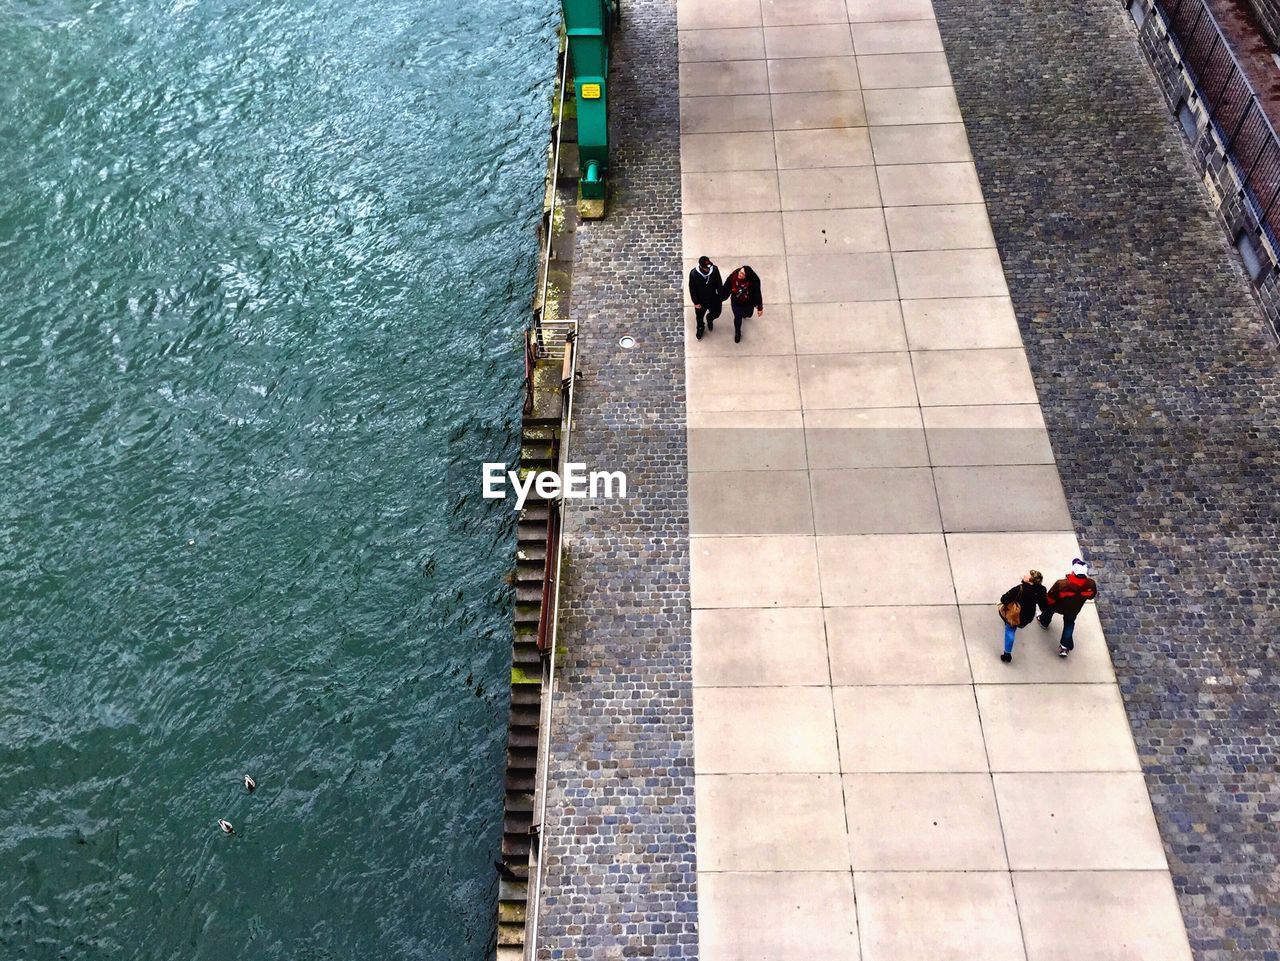 High angle view of people walking on promenade by rhine river